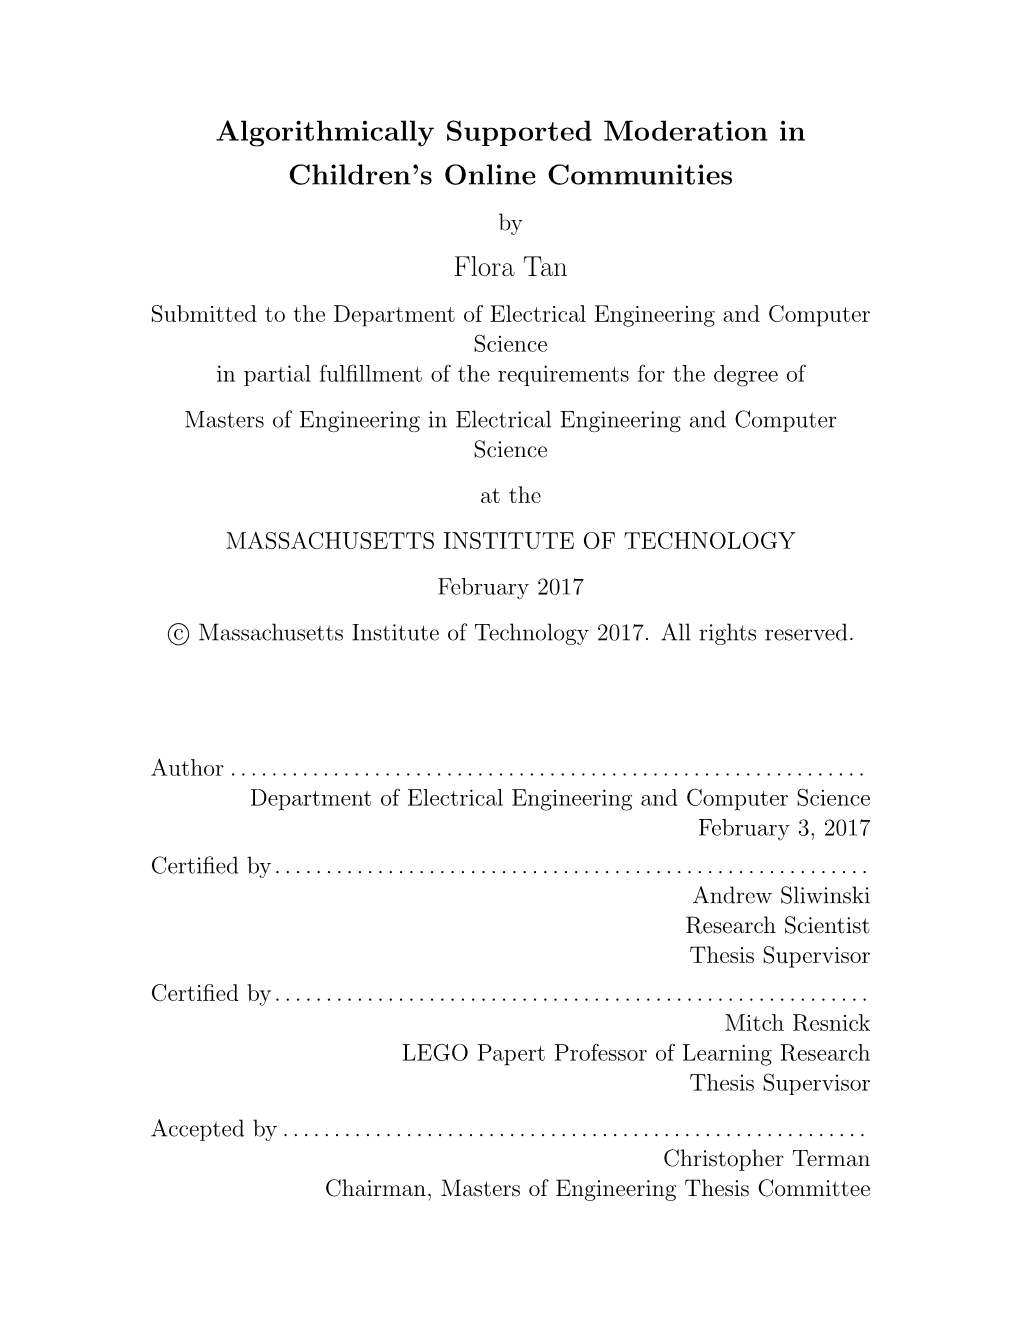 Algorithmically Supported Moderation in Children's Online Communities Flora